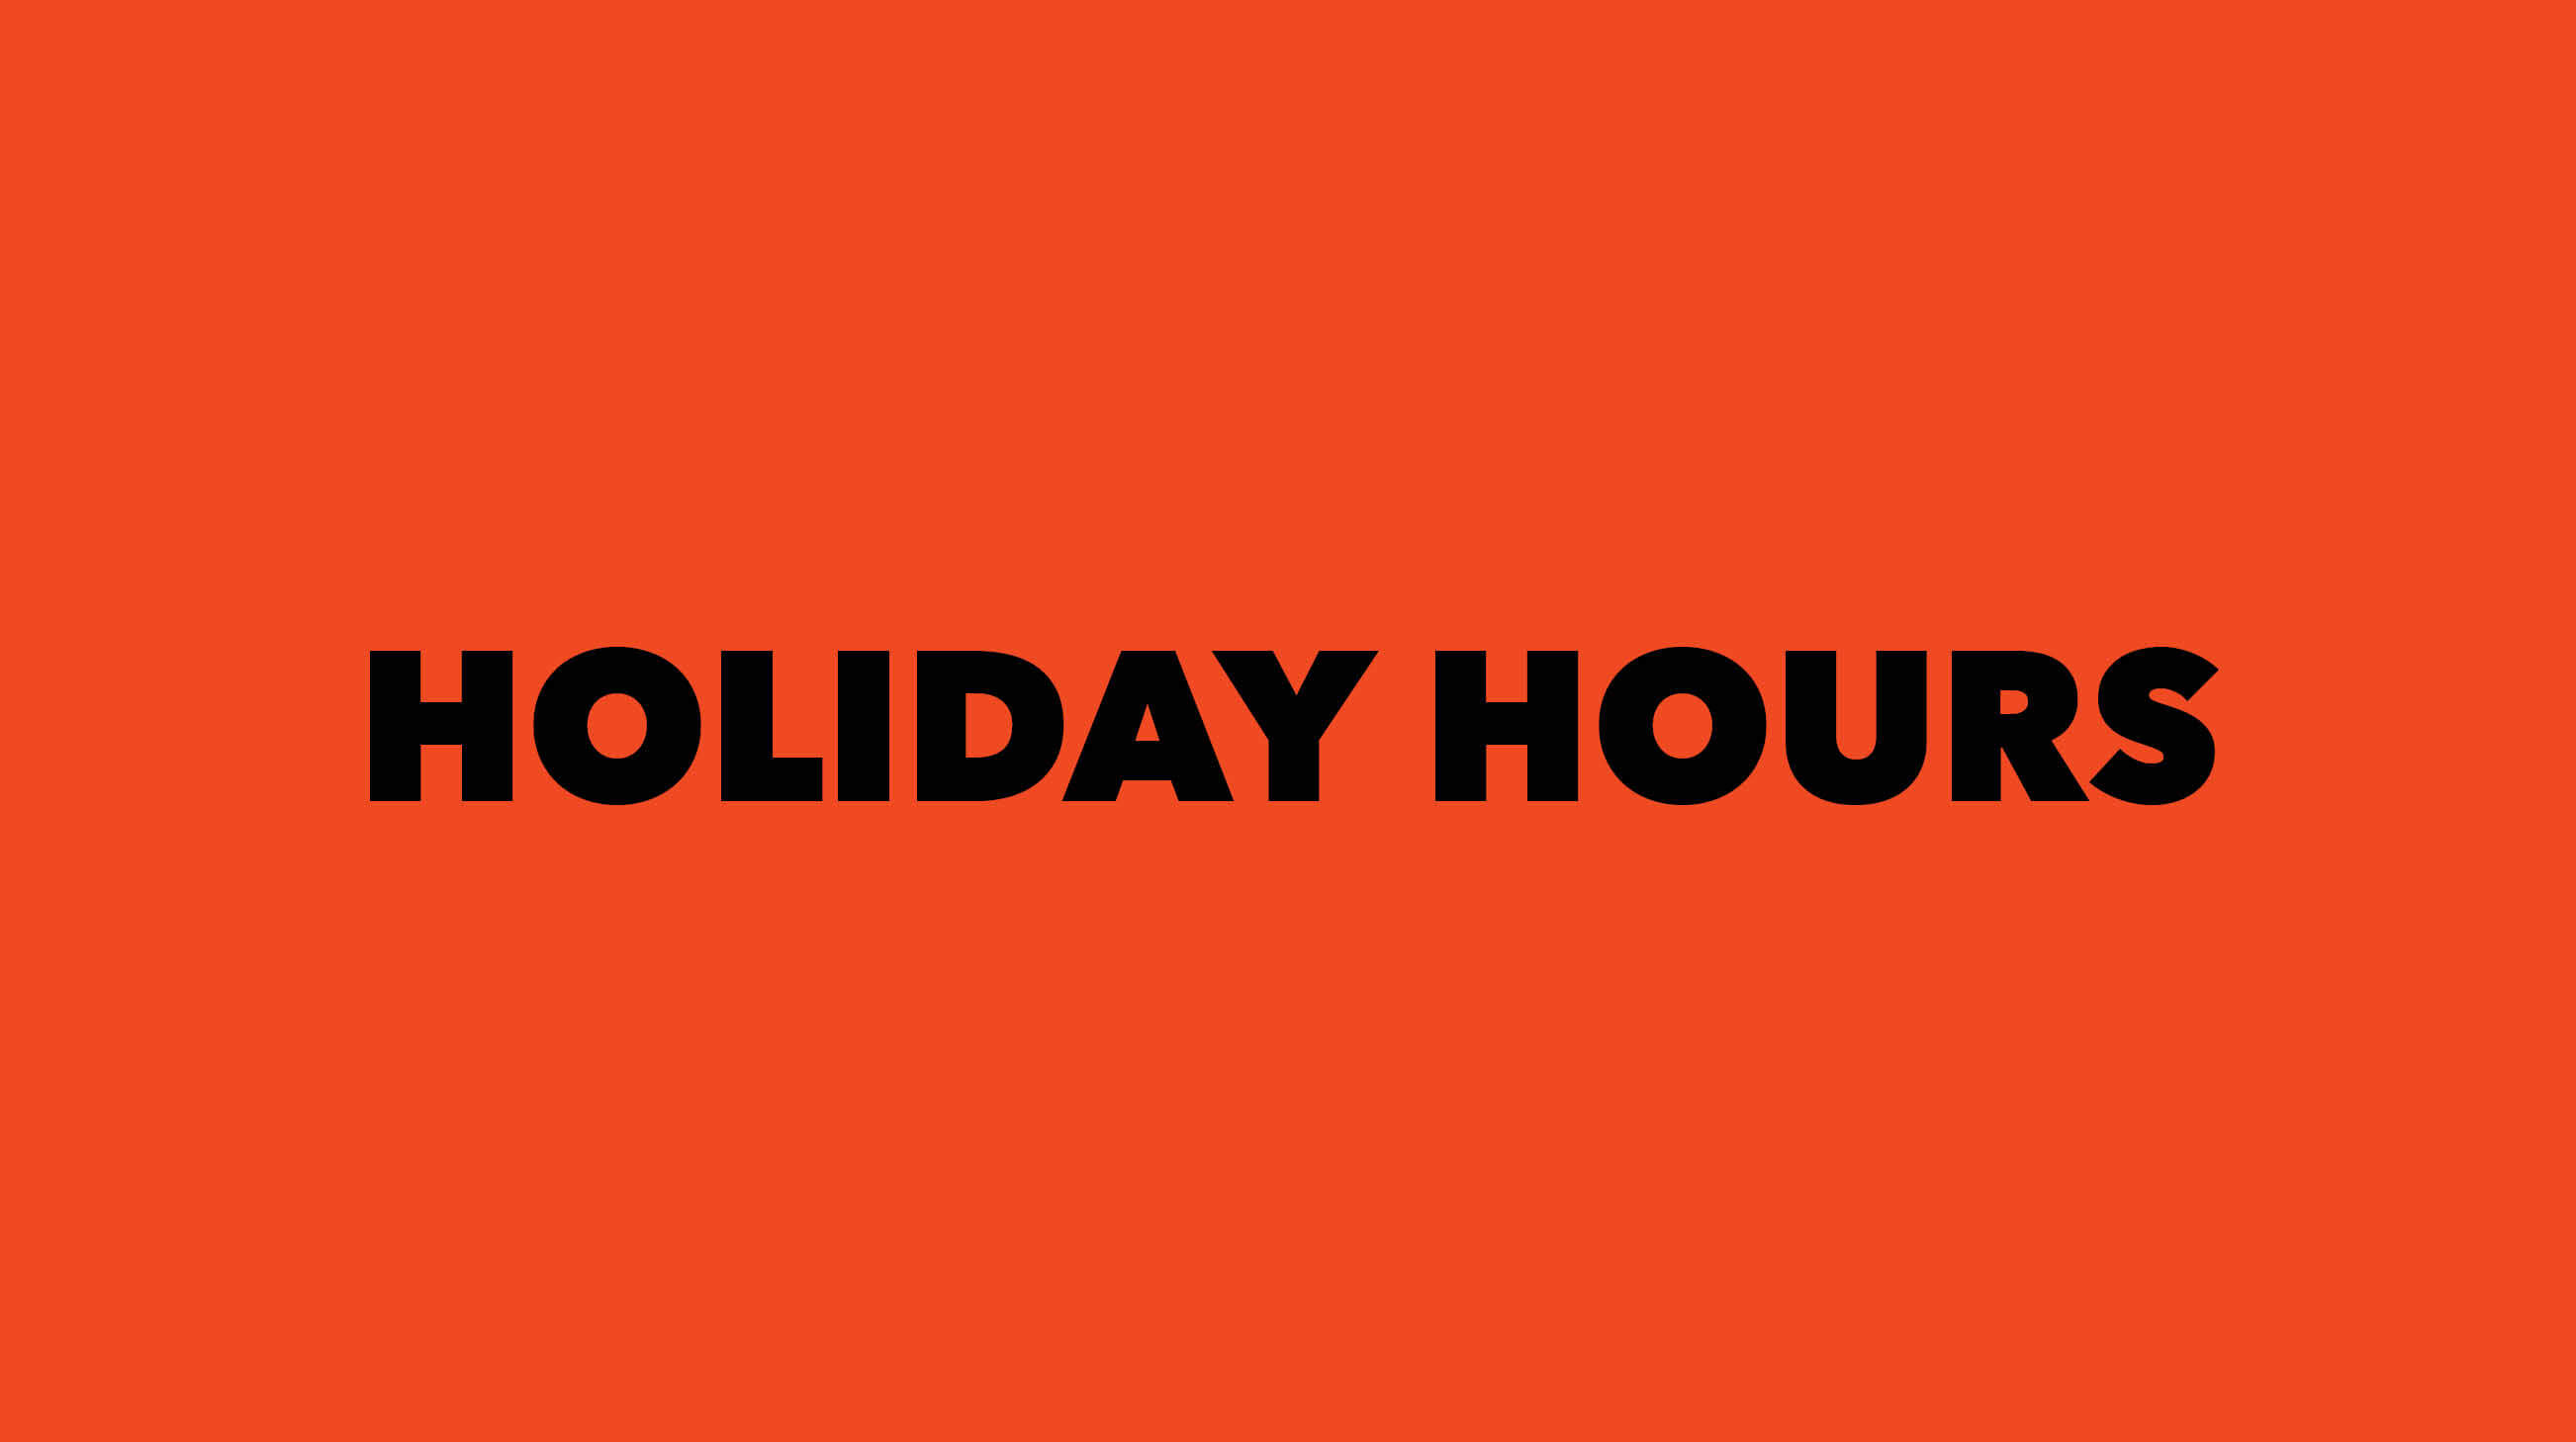 Text reads "Holiday Hours"